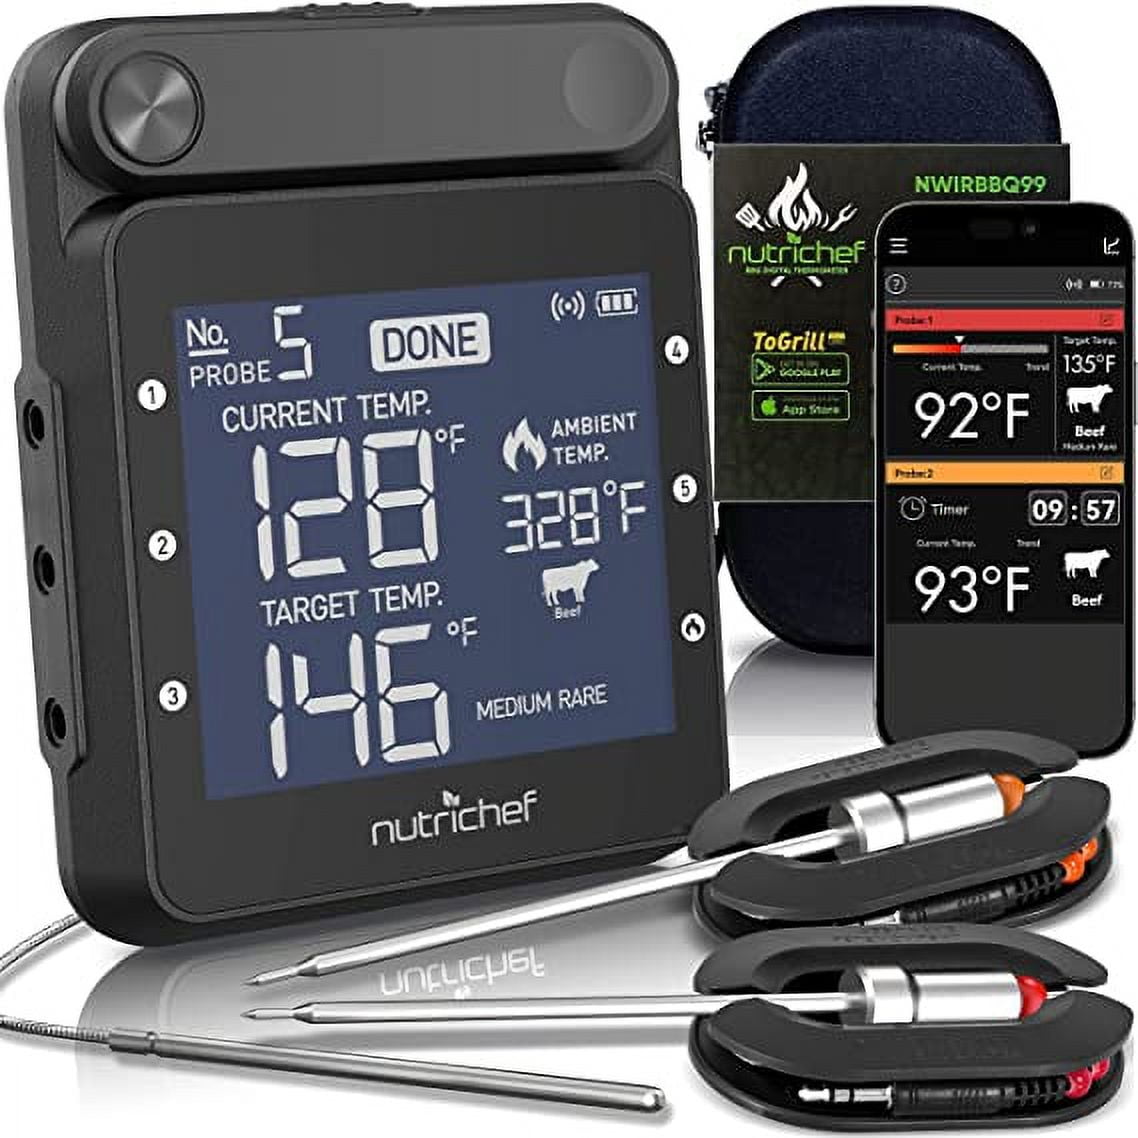 RUXAN Wireless Smart Meat Thermometer with 2 Probes,Timer,Alarm,Smart LCD  Backlight,165 ft Bluetooth Grill Thermometer for Cooking,BBQ, Oven, Grill